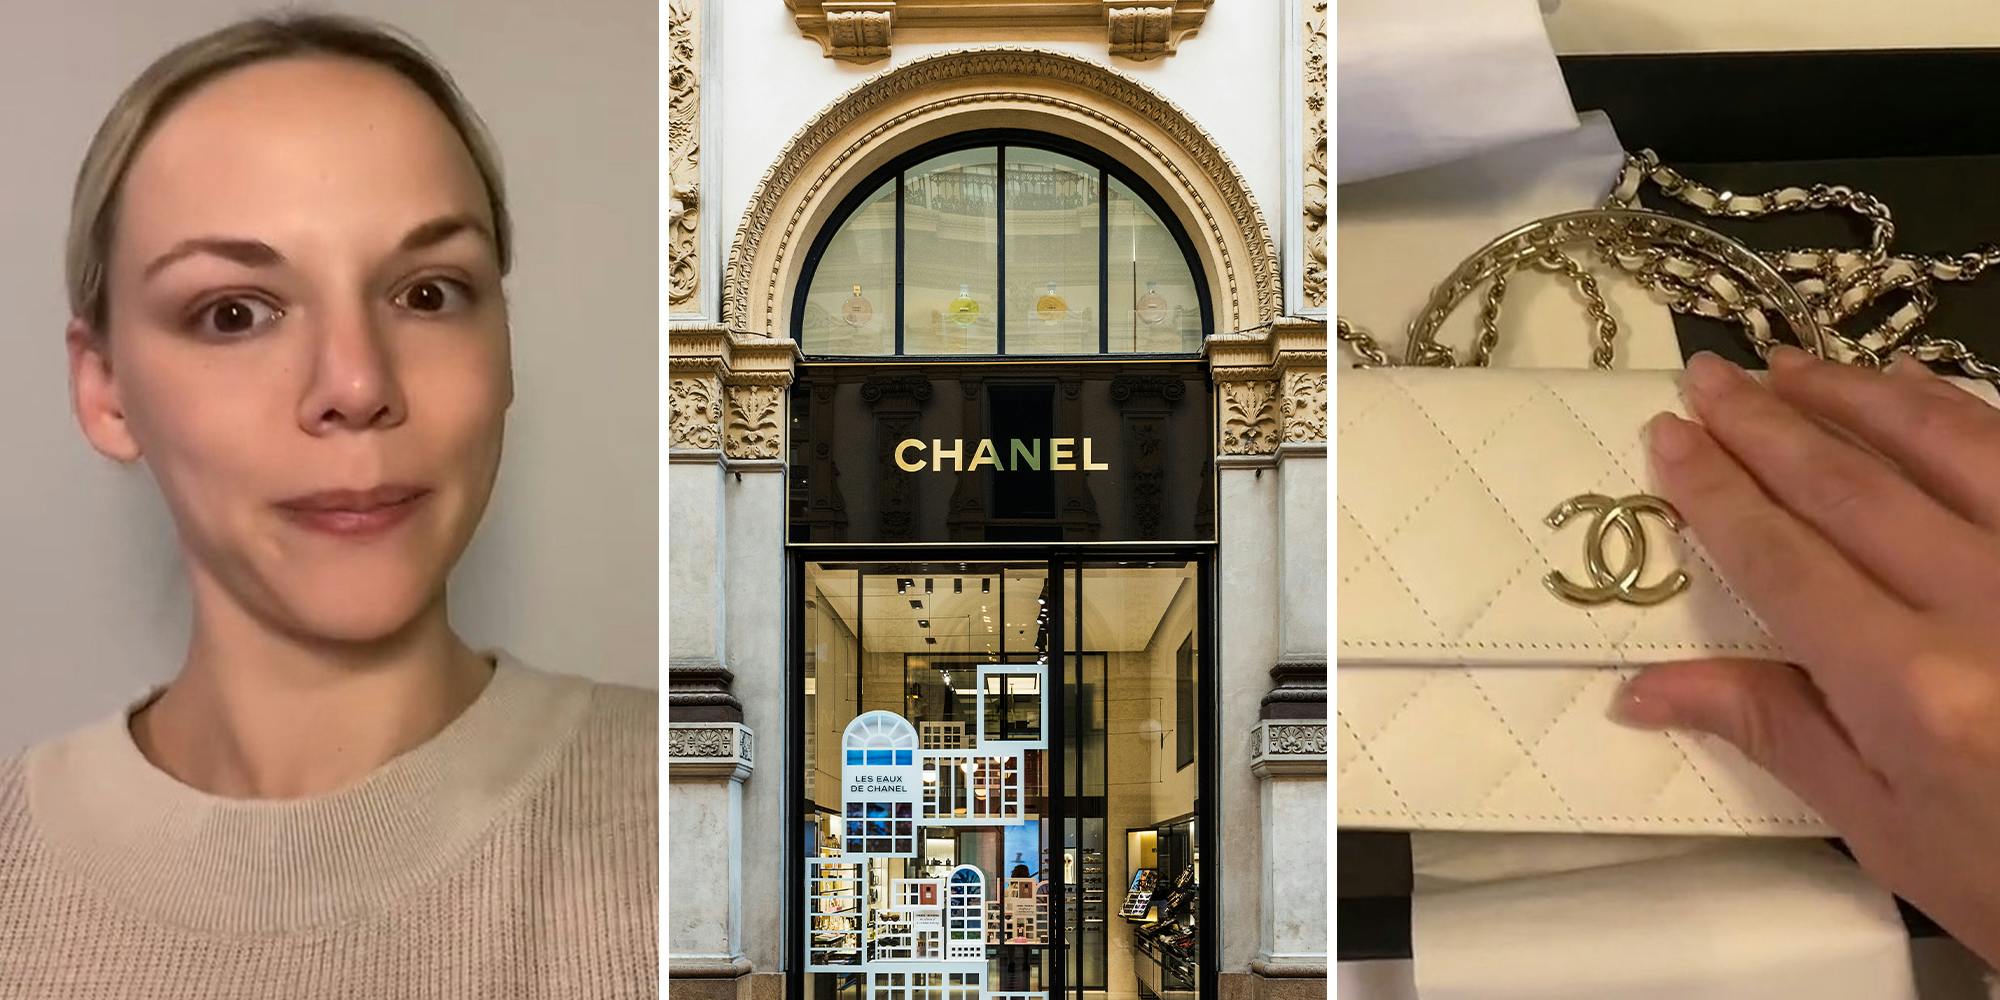 Chanel store of selling her a fake purse